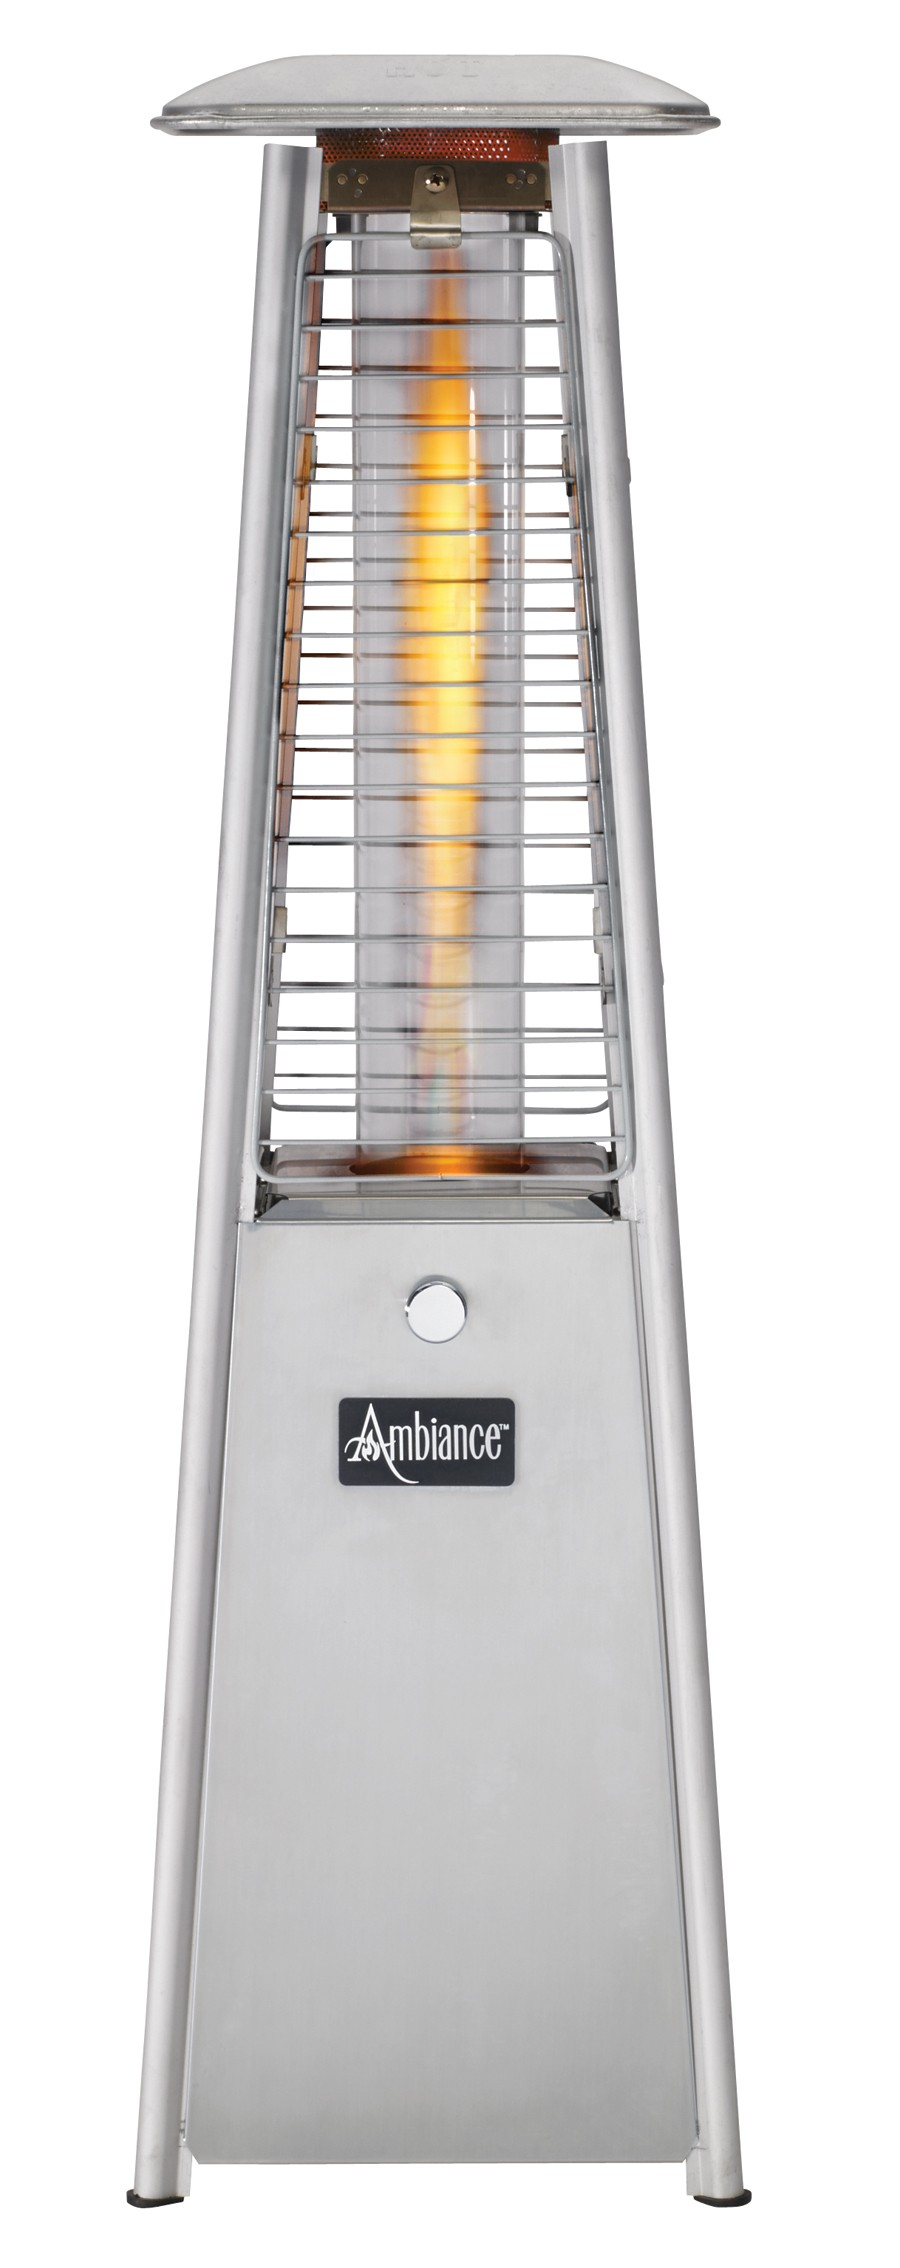 Patio Comfort Ambiance Mini Heater Propane Gift Guide within size 900 X 2268